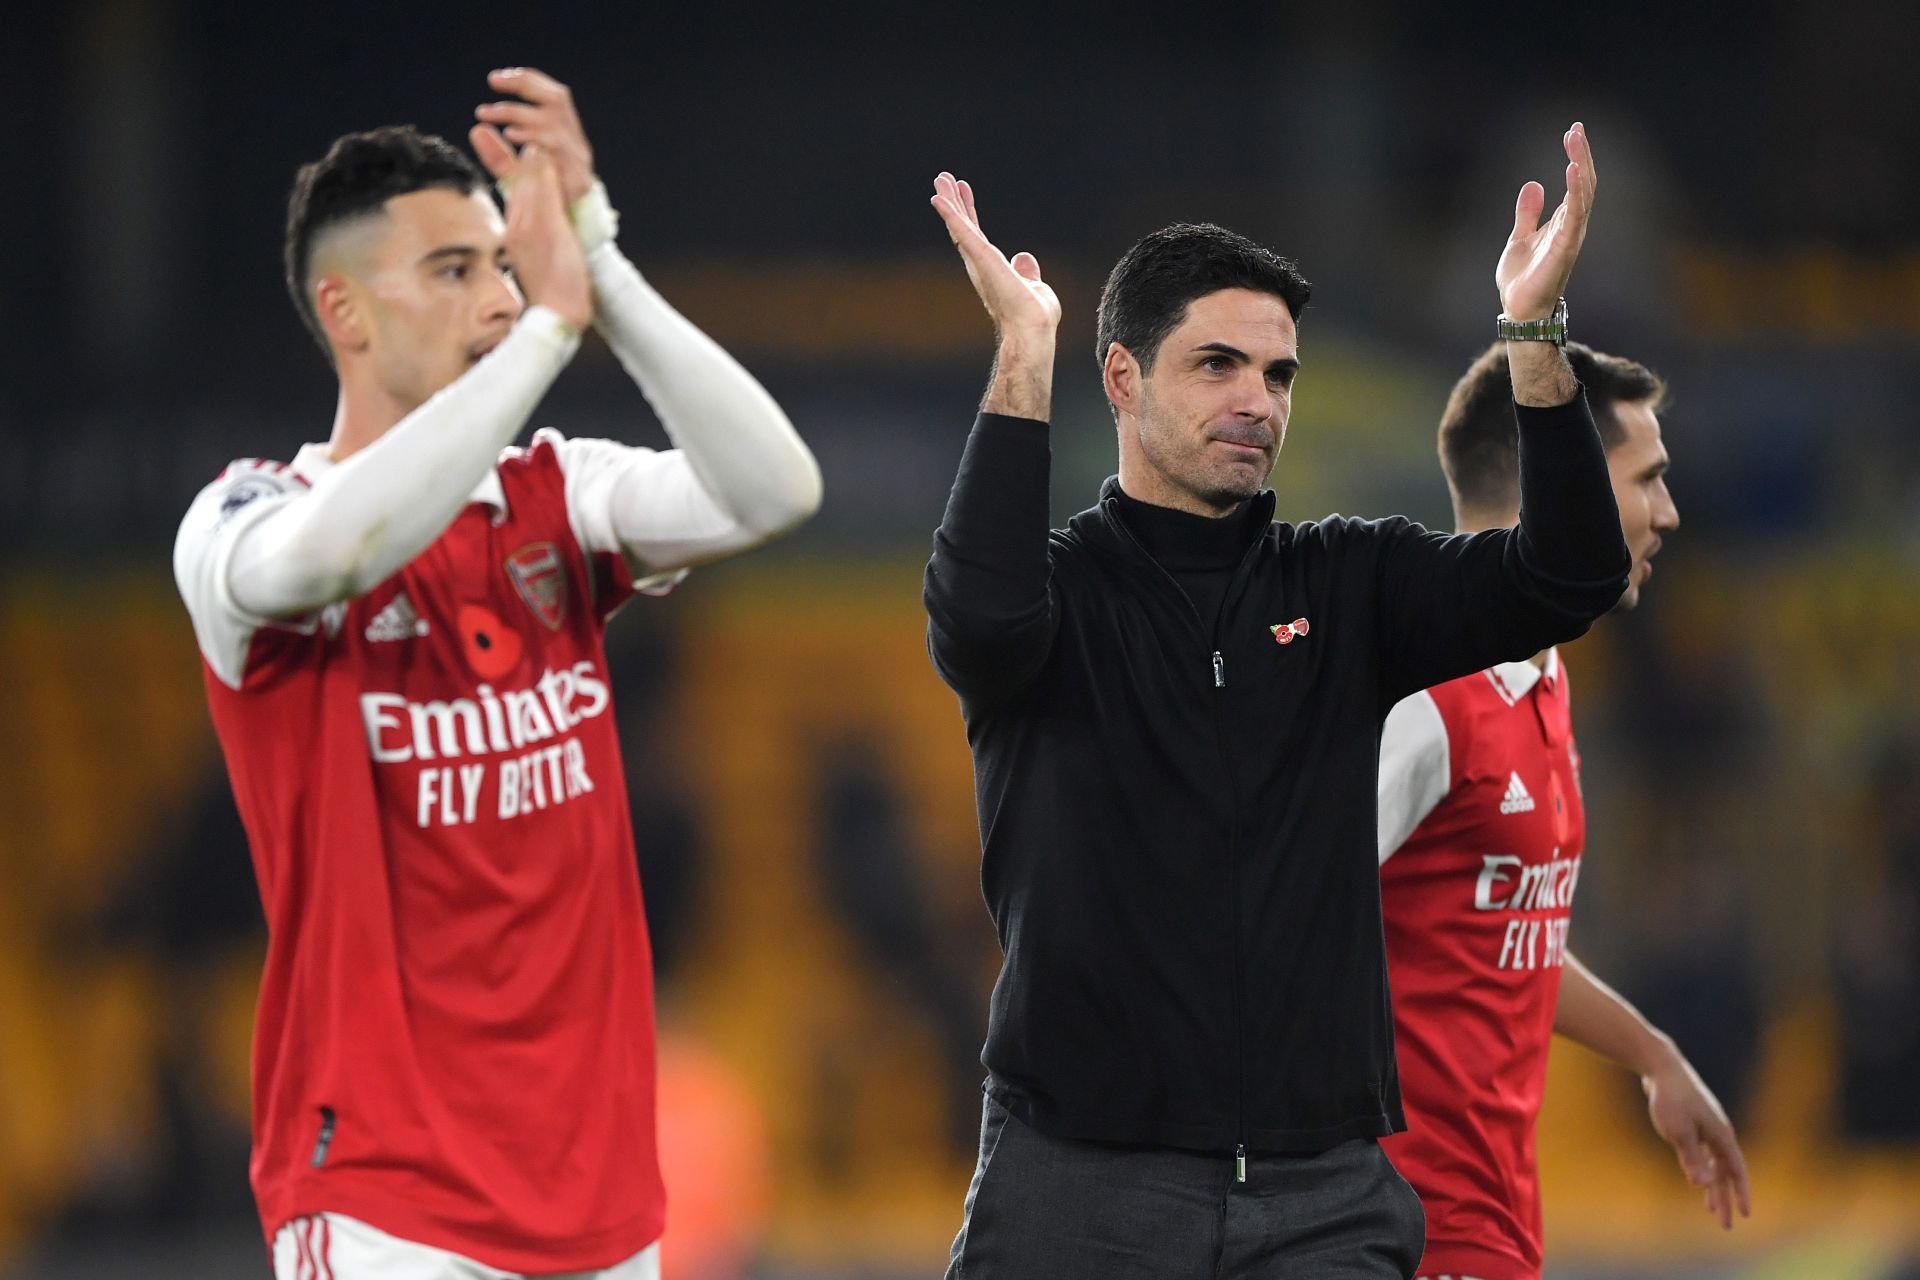 Arteta (right) was praised by the Liverpool assistant coach (not in pic).